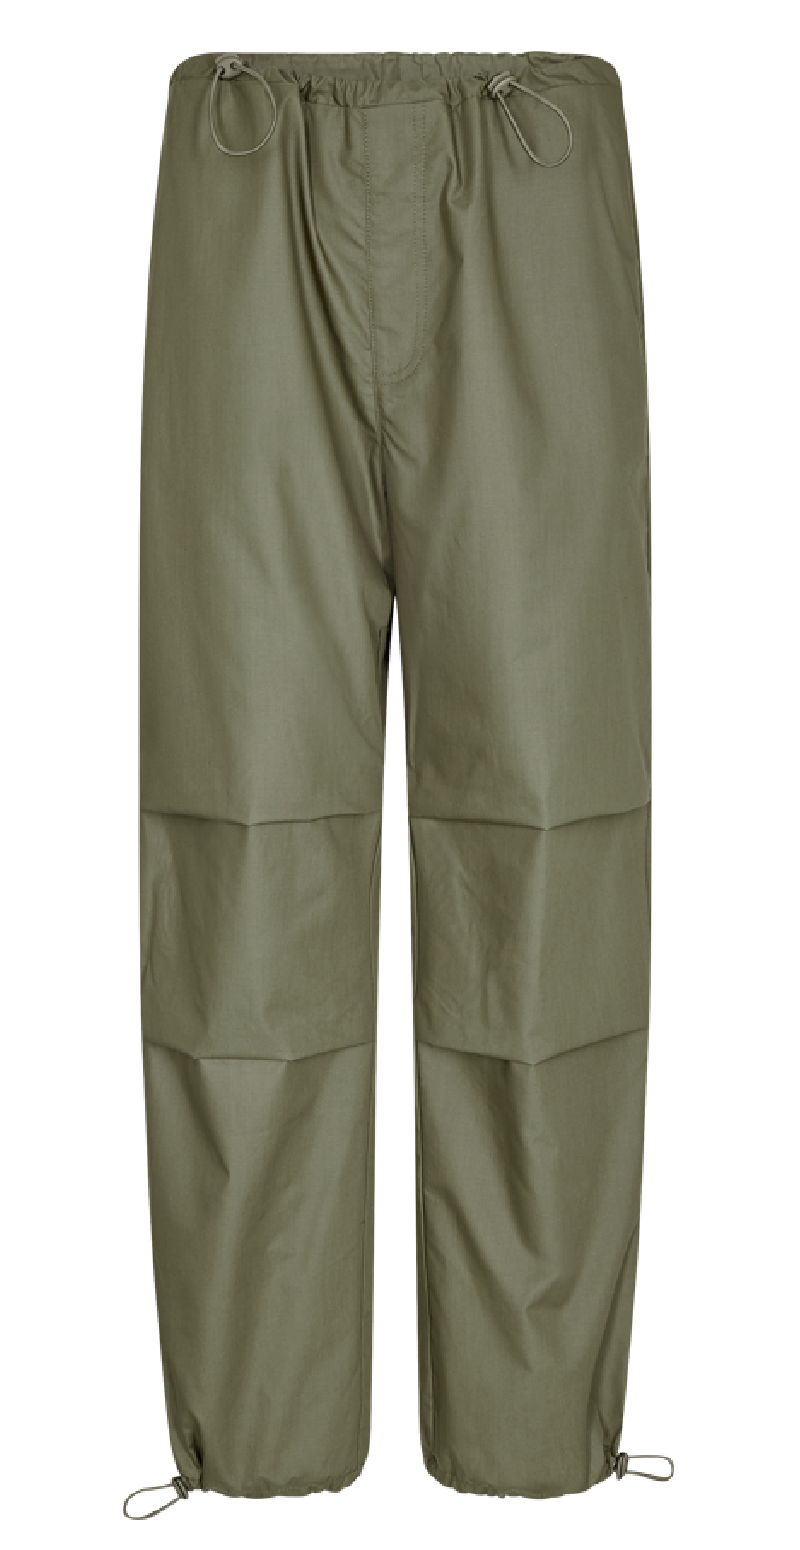 Allday-pant olive night